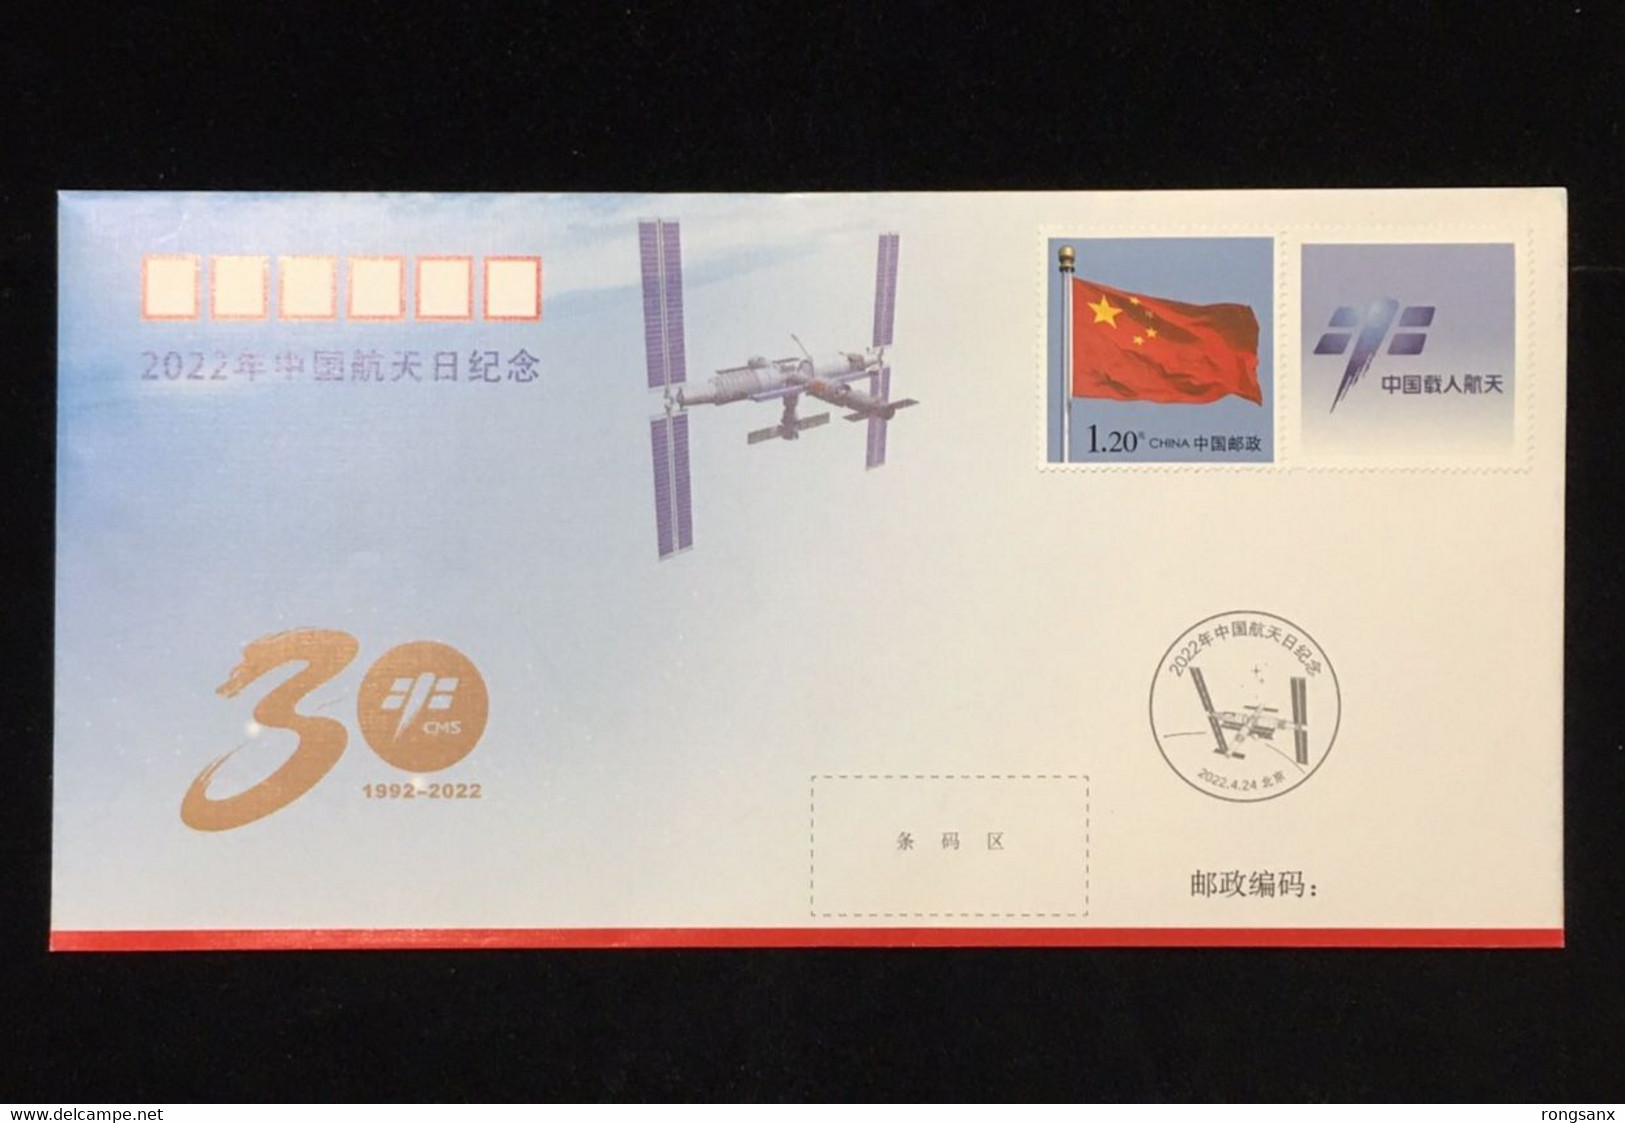 HT-95 CHINA SPACE DAY COMM.COVER 2022 - Asien